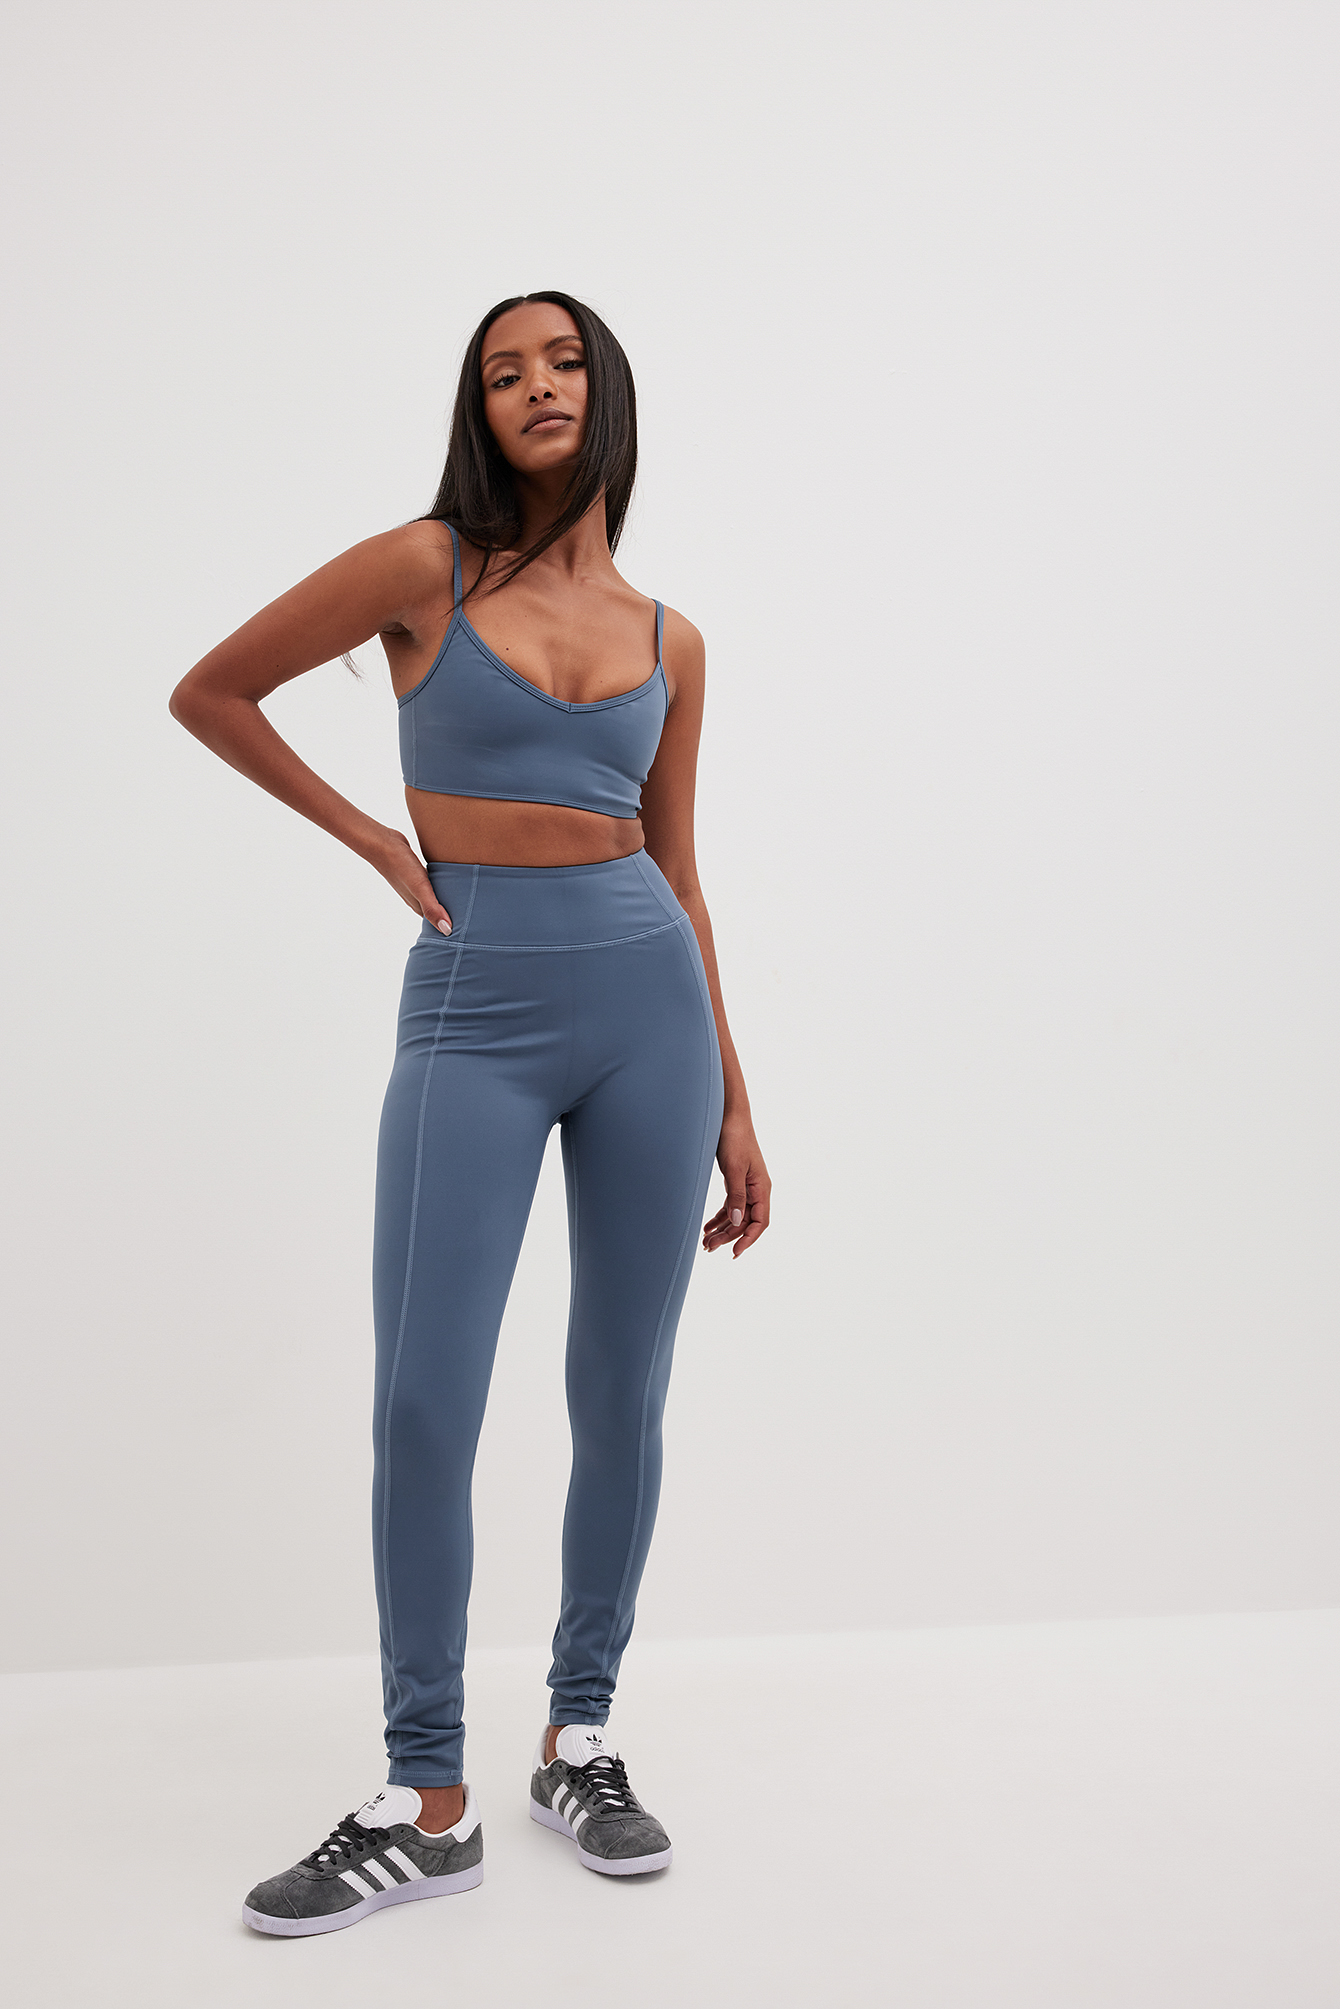 Asos Hiit Seamless Textured Long Sleeve Crop Top Bralet Booty Short And  Legging In C